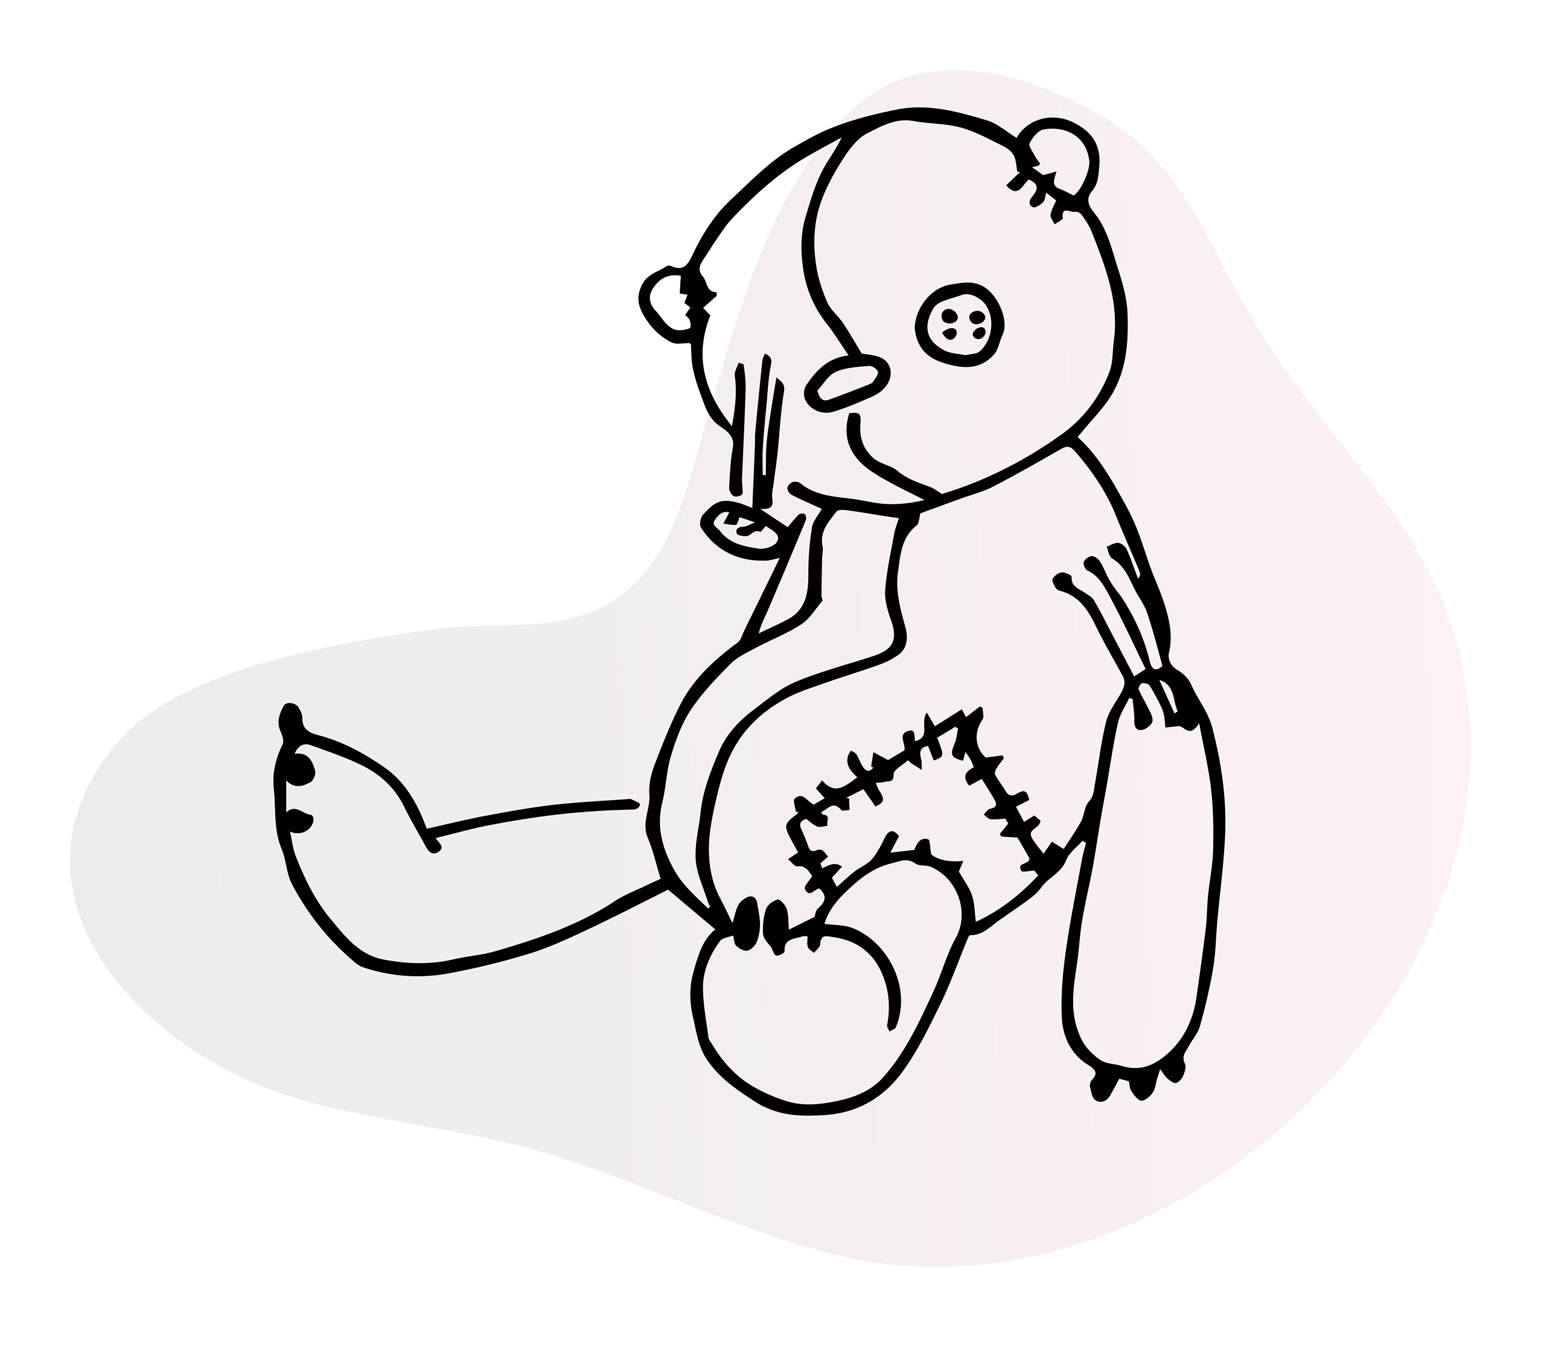 Line illustration of stuffed toy bear slumped against a wall, a stitched eye and arm hanging loose, hip patched, head slumped